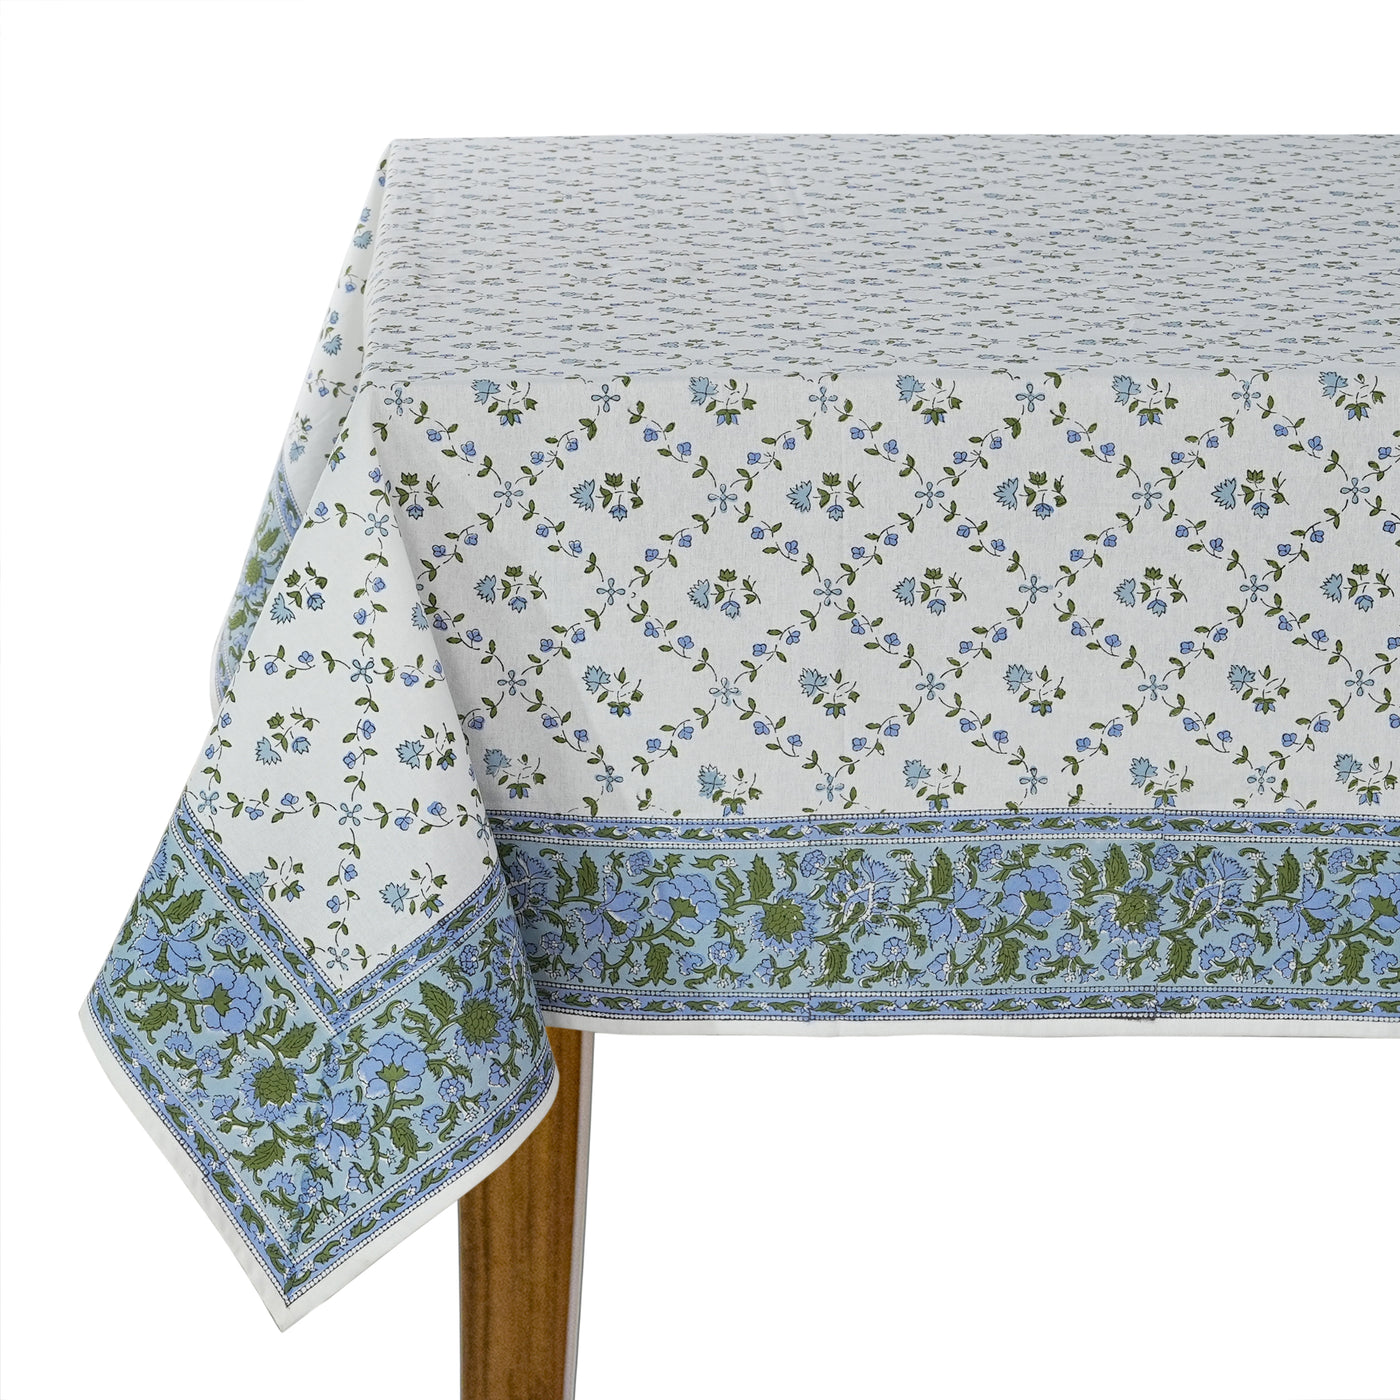 Fabricrush Powder Blue Indian Hand Block Floral Printed Cotton Table Cover, Table Top, French Tablecloth